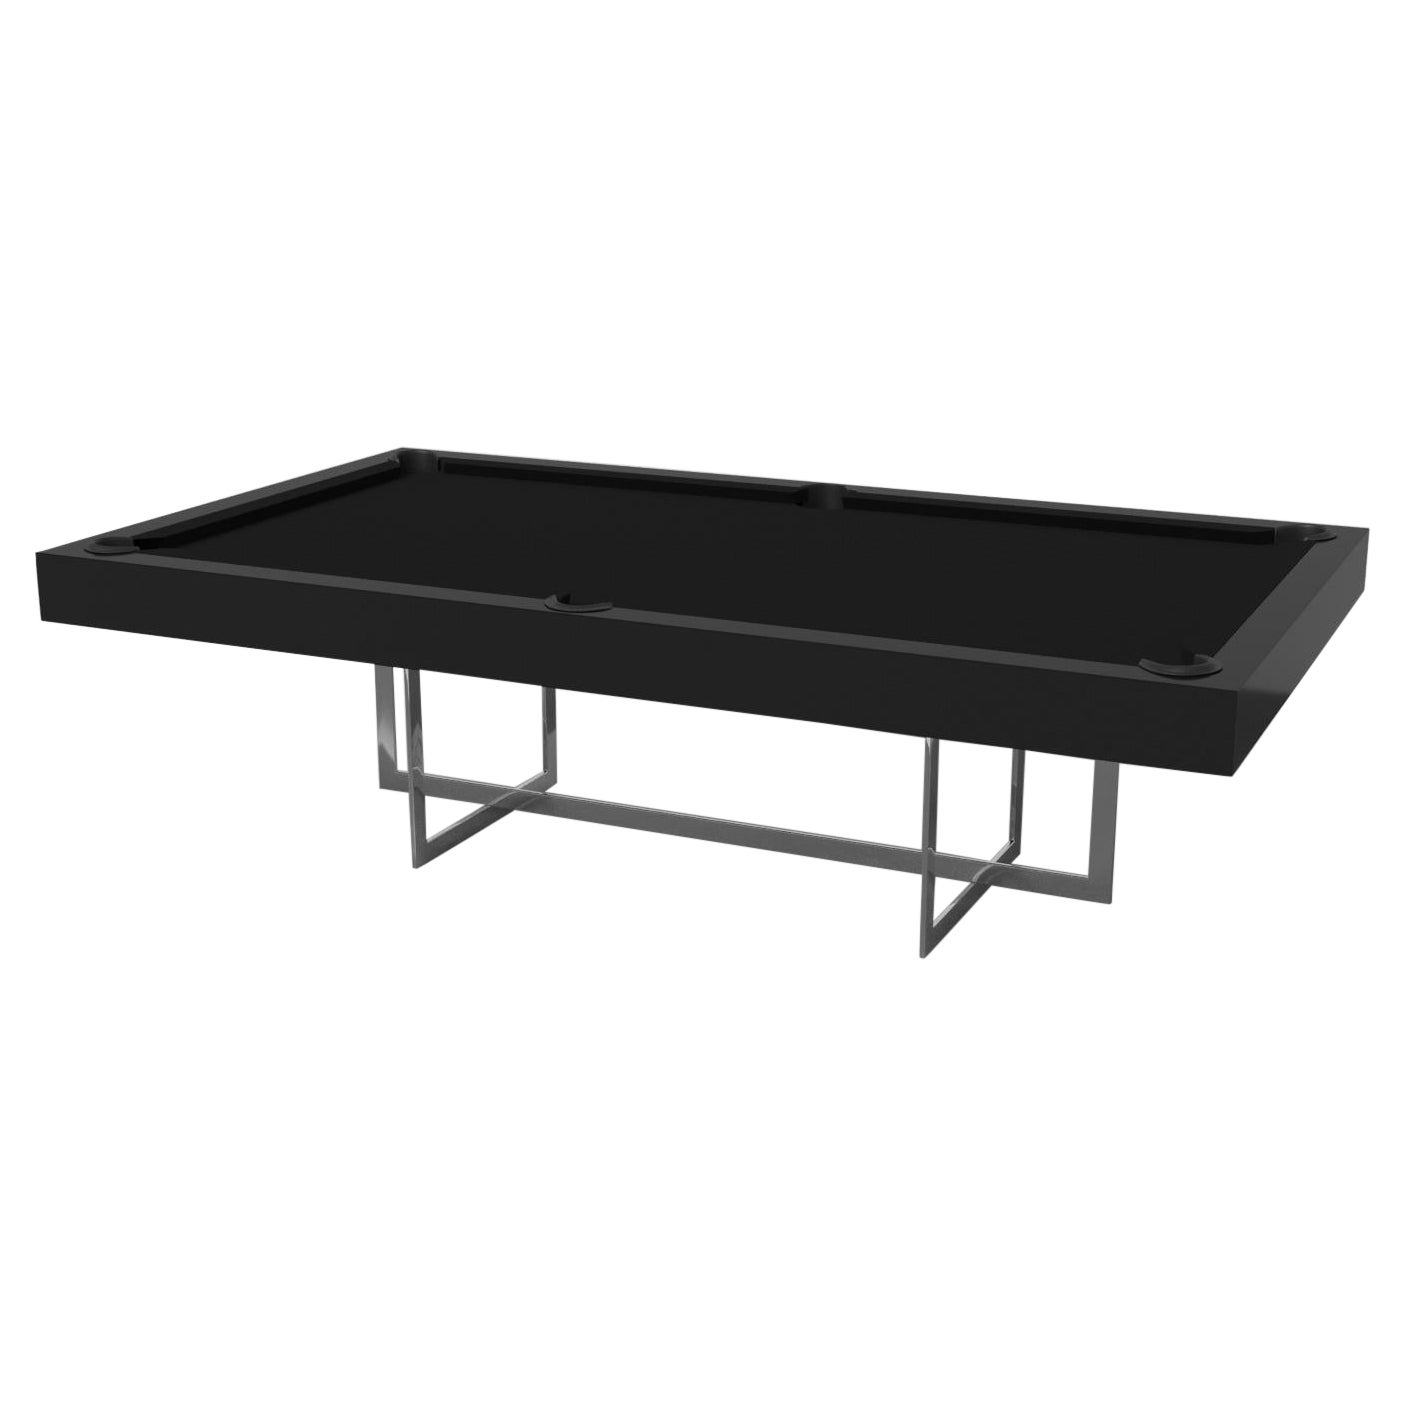 Elevate Customs Beso Pool Table / Solid Pantone Black Color in 8.5' -Made in USA